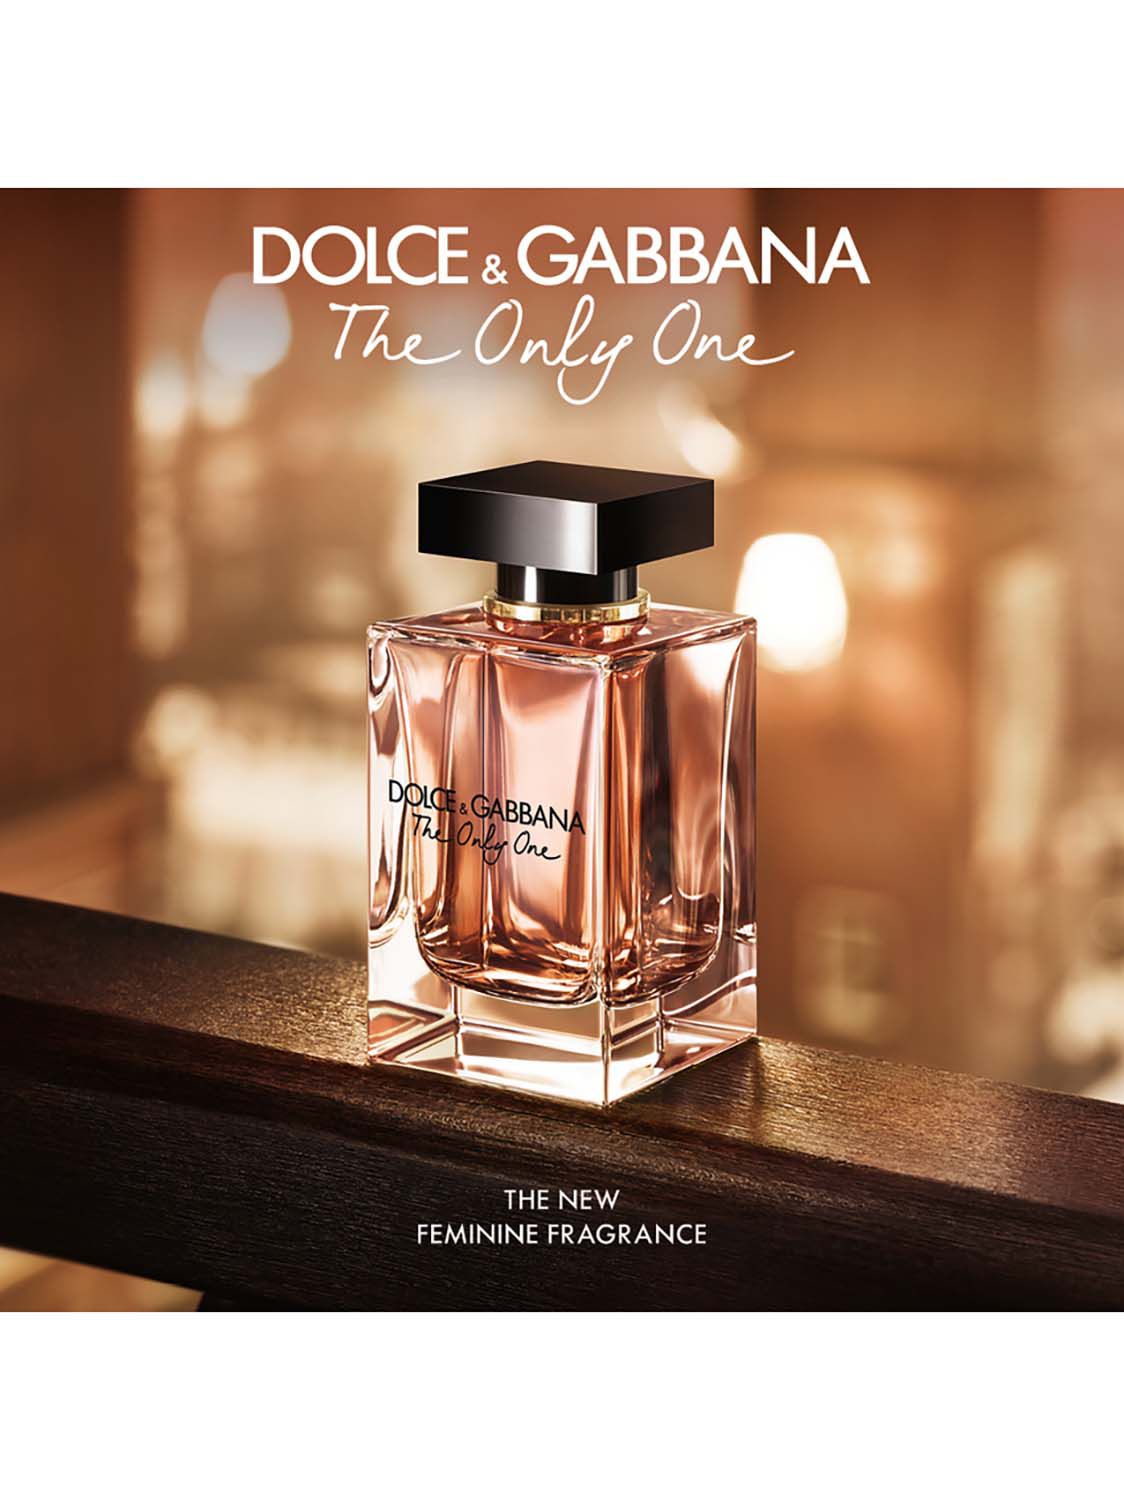 Dolce And Gabbana The Only One Eau De Parfum 30ml At John Lewis And Partners